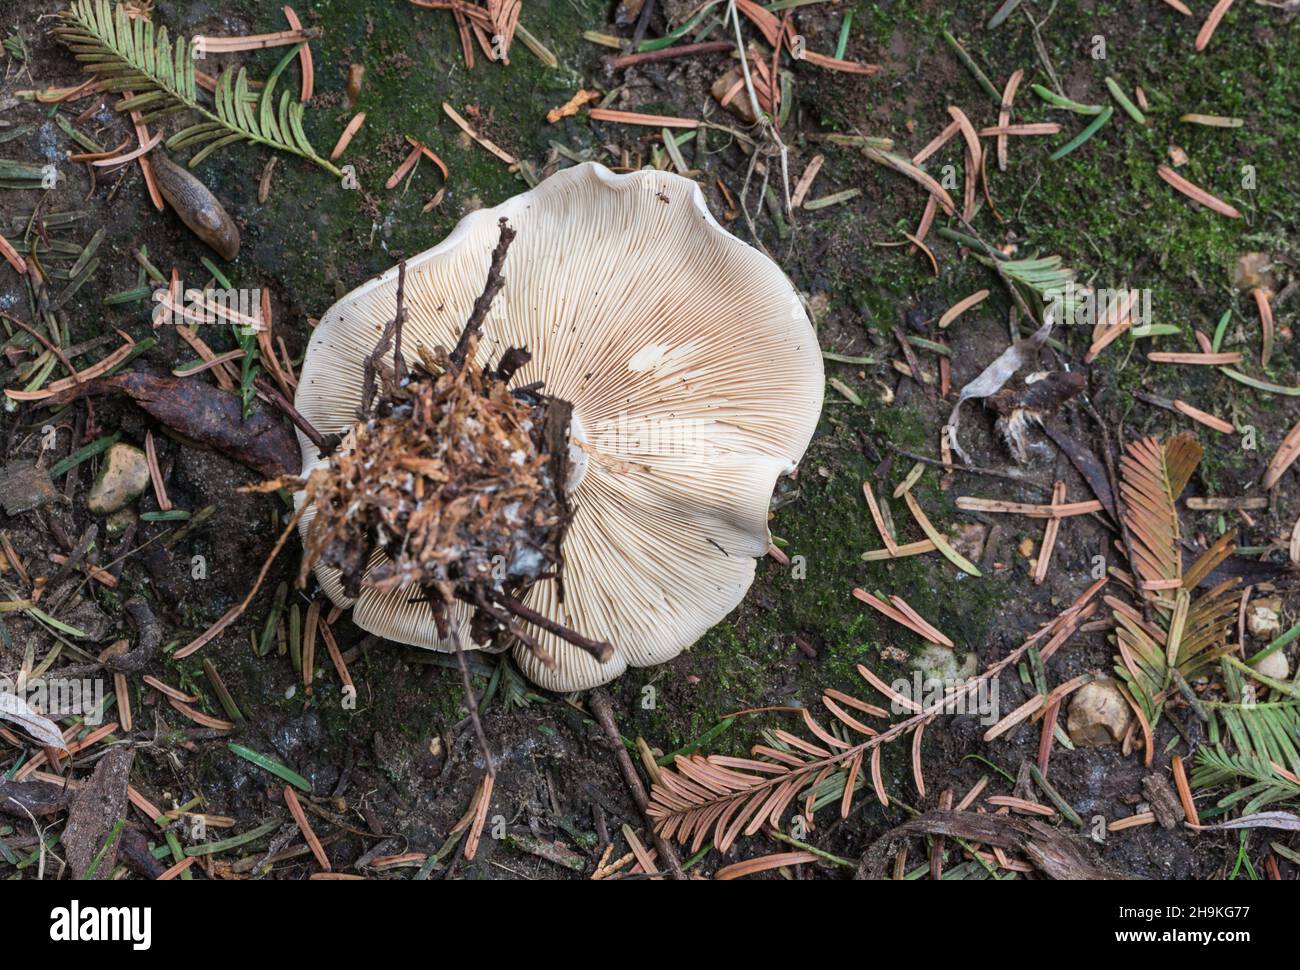 Fungus - Clouded Funnel (Clitocybe nebularis) Stock Photo